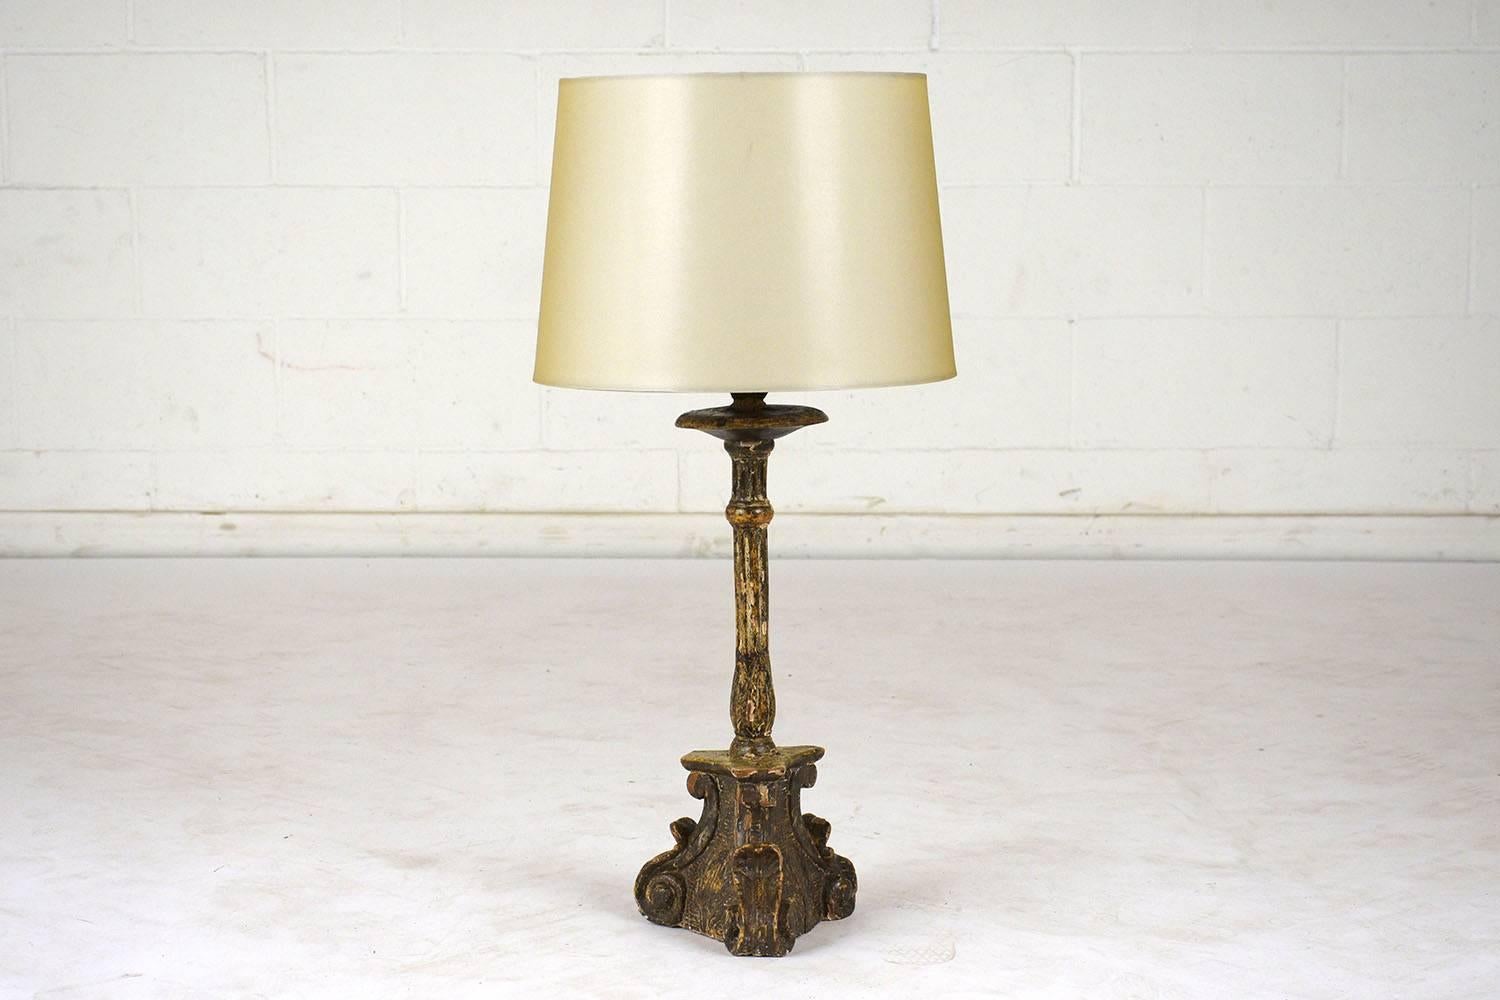 This 1850s Italian Baroque-style table lamp features a base made of carved wood with a multi-color polychrome finish. The base of the lamp is adorned with carved cherub faces, scrolls, and acanthus leaves. Accompanying the lamp is a new sand color